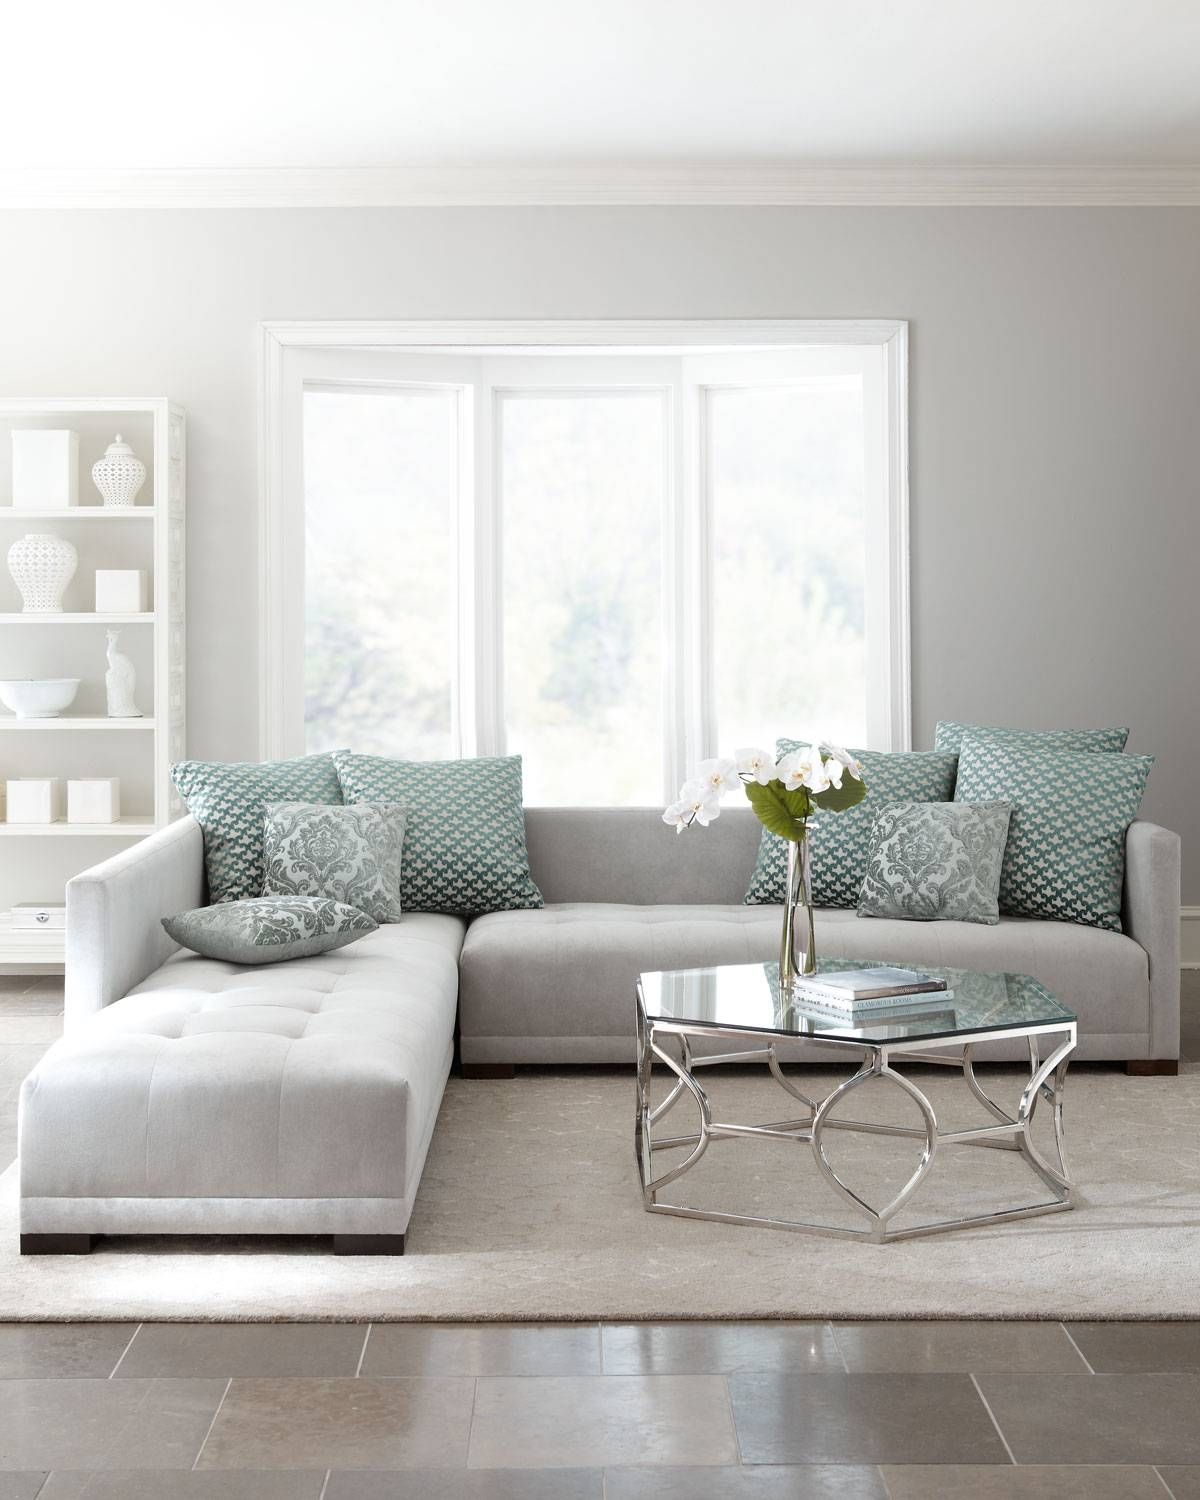 Sofa: Comfort And Style Is Evident In This Dynamic With Tufted Throughout Crate And Barrel Sectional Sofas (View 25 of 30)